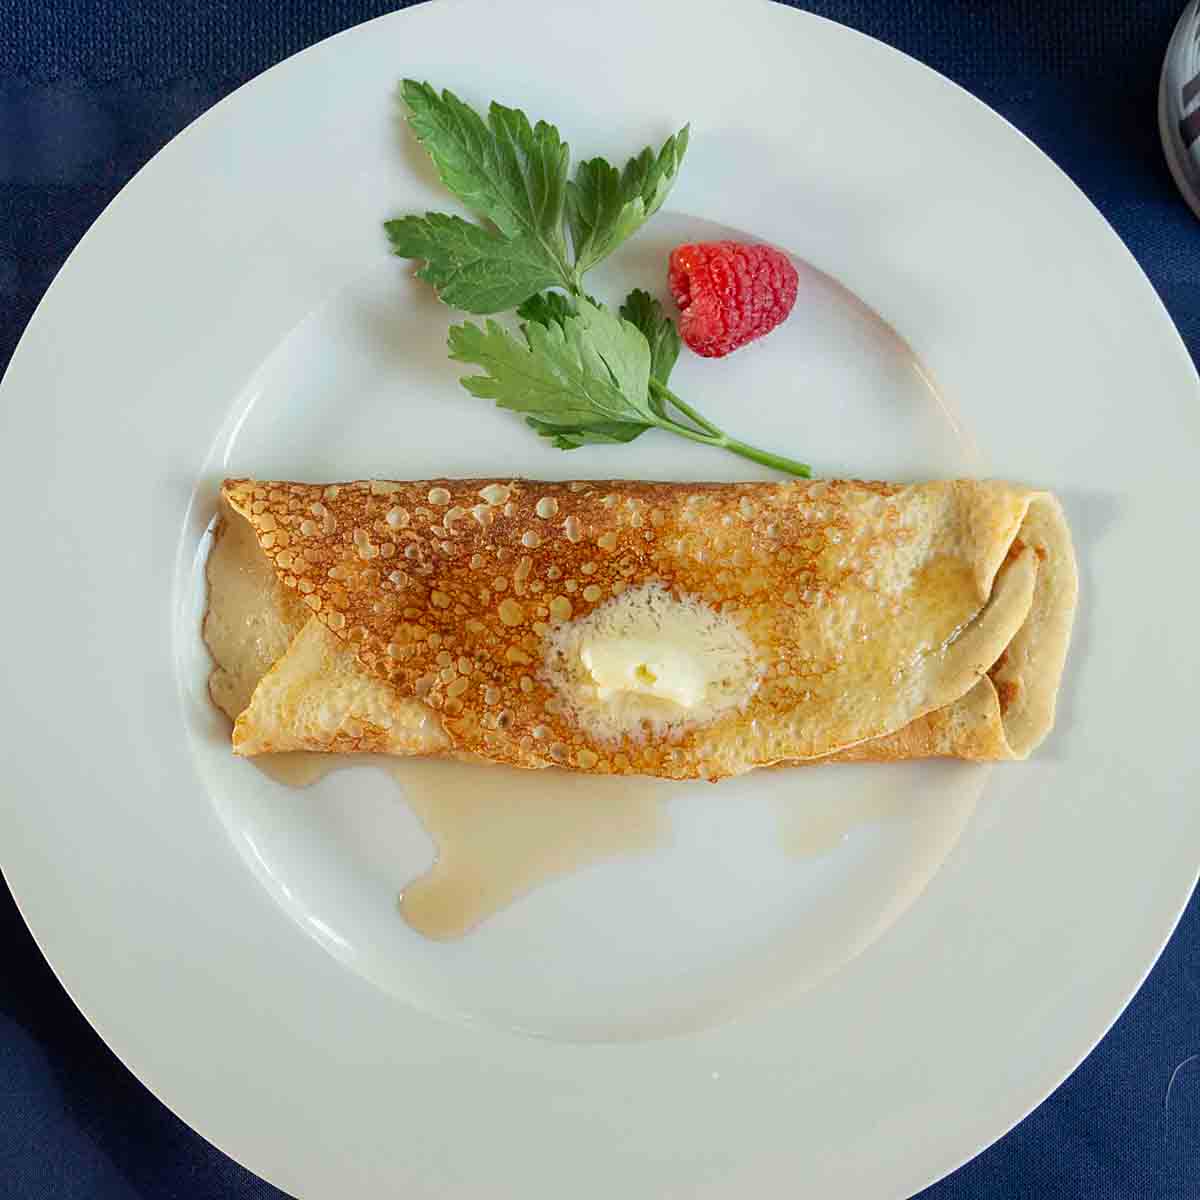 Crepes Recipe (How to Make Crepes and Filling Ideas) - House of Nash Eats